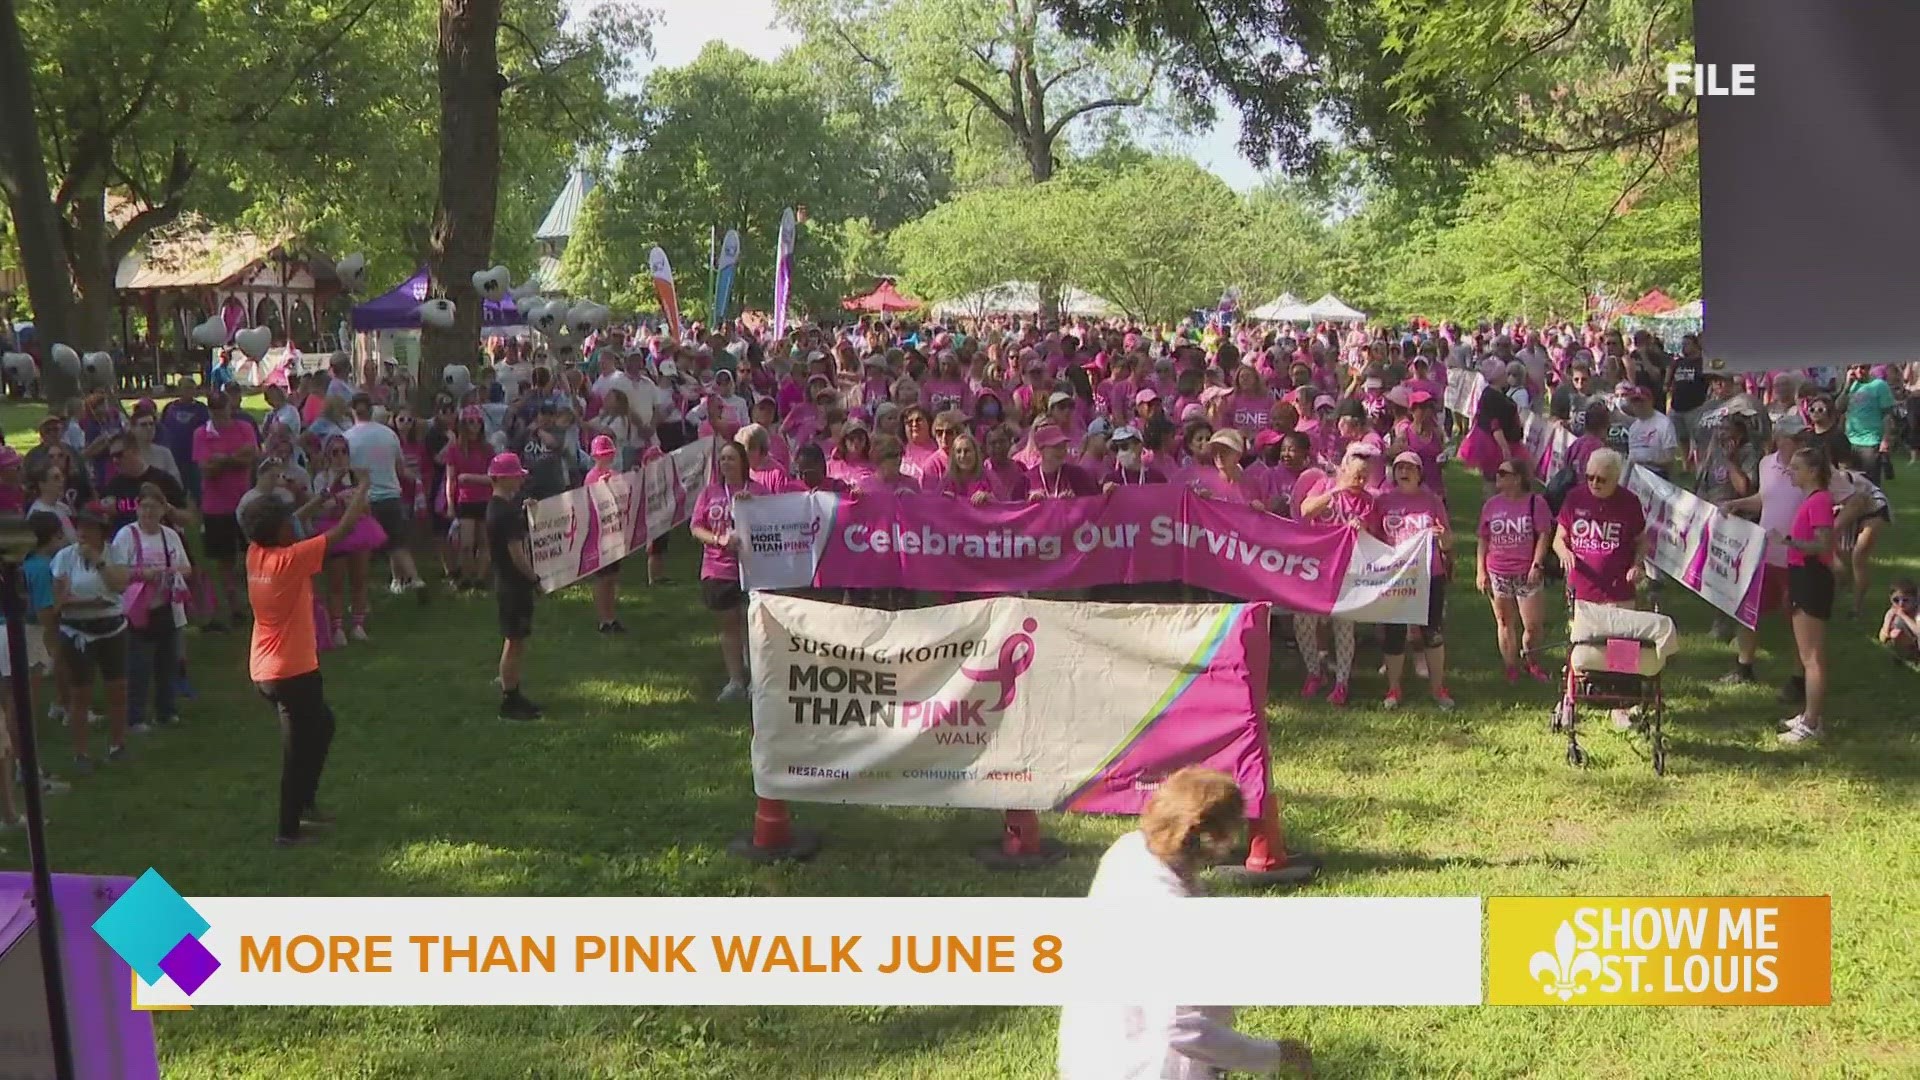 Learn about the changes happening at the More than Pink Walk and how to register.